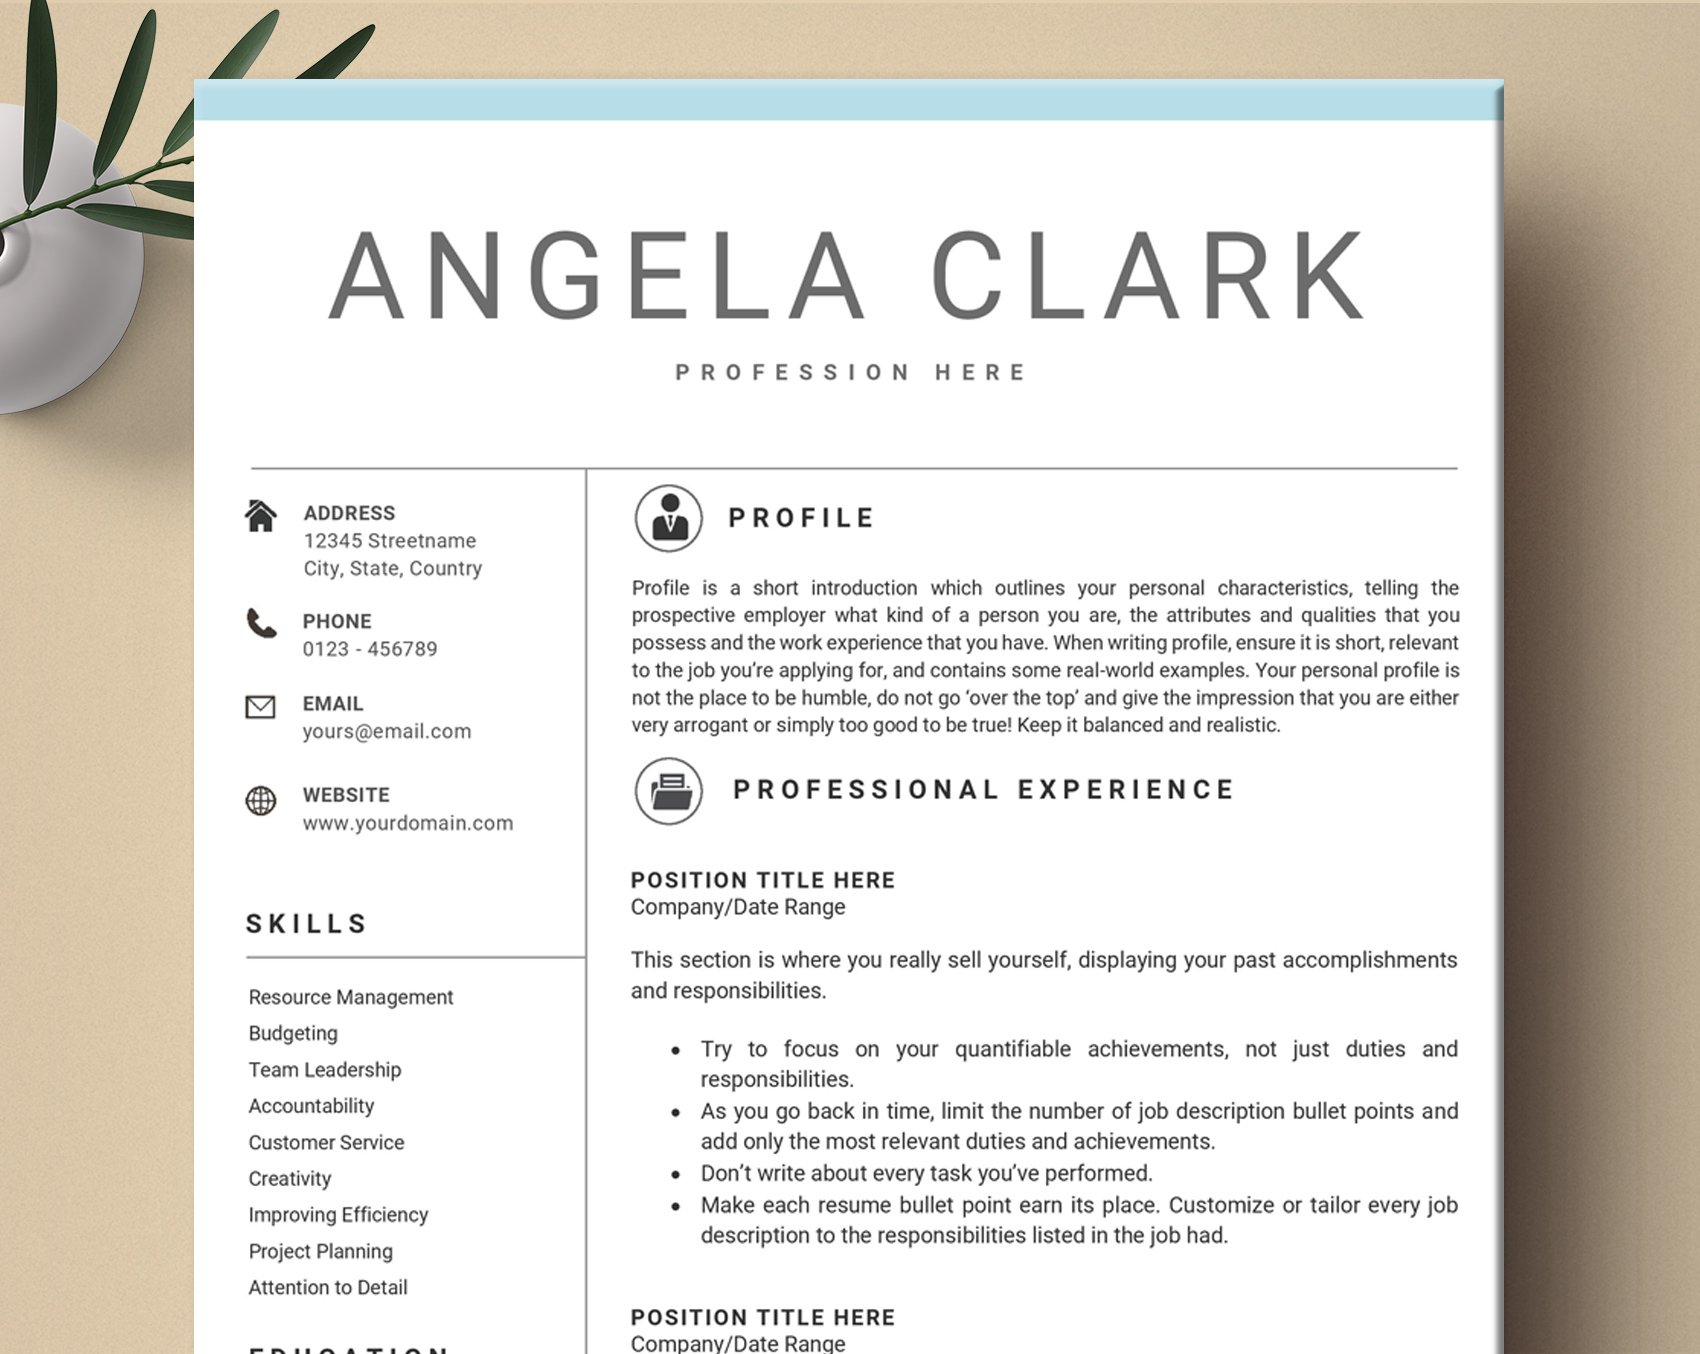 Word Resume 2 Pages & Cover Letter cover image.